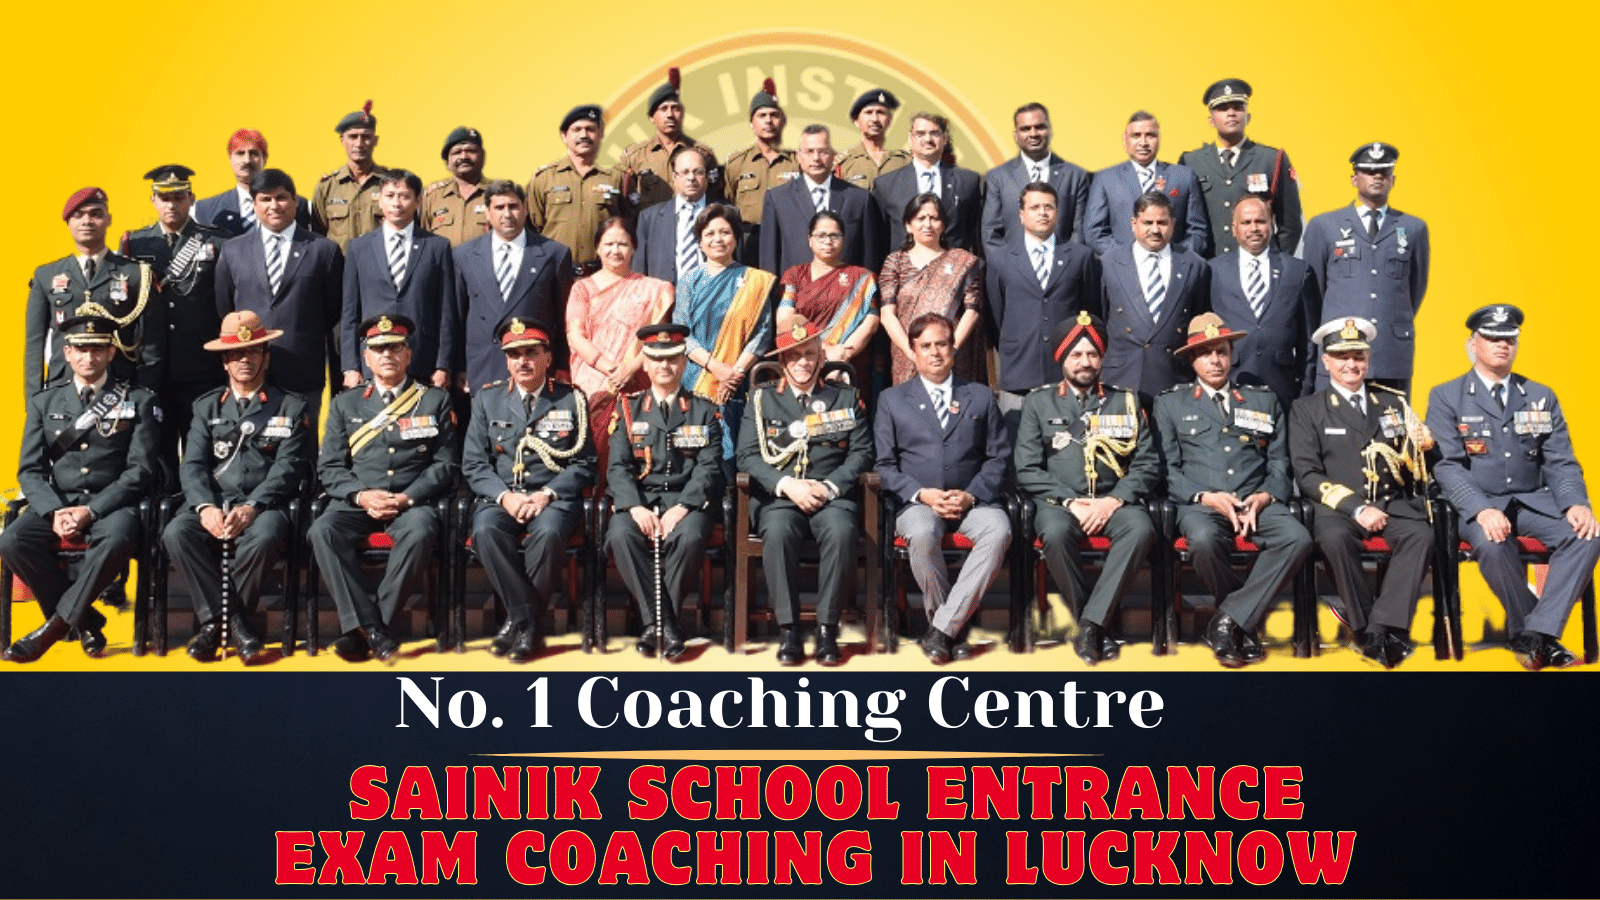 The Sainik Institute Lucknow strive to provide a nurturing environment where students can grow and develop the skills necessary to succeed in the competitive entrance exams for Sainik Schools